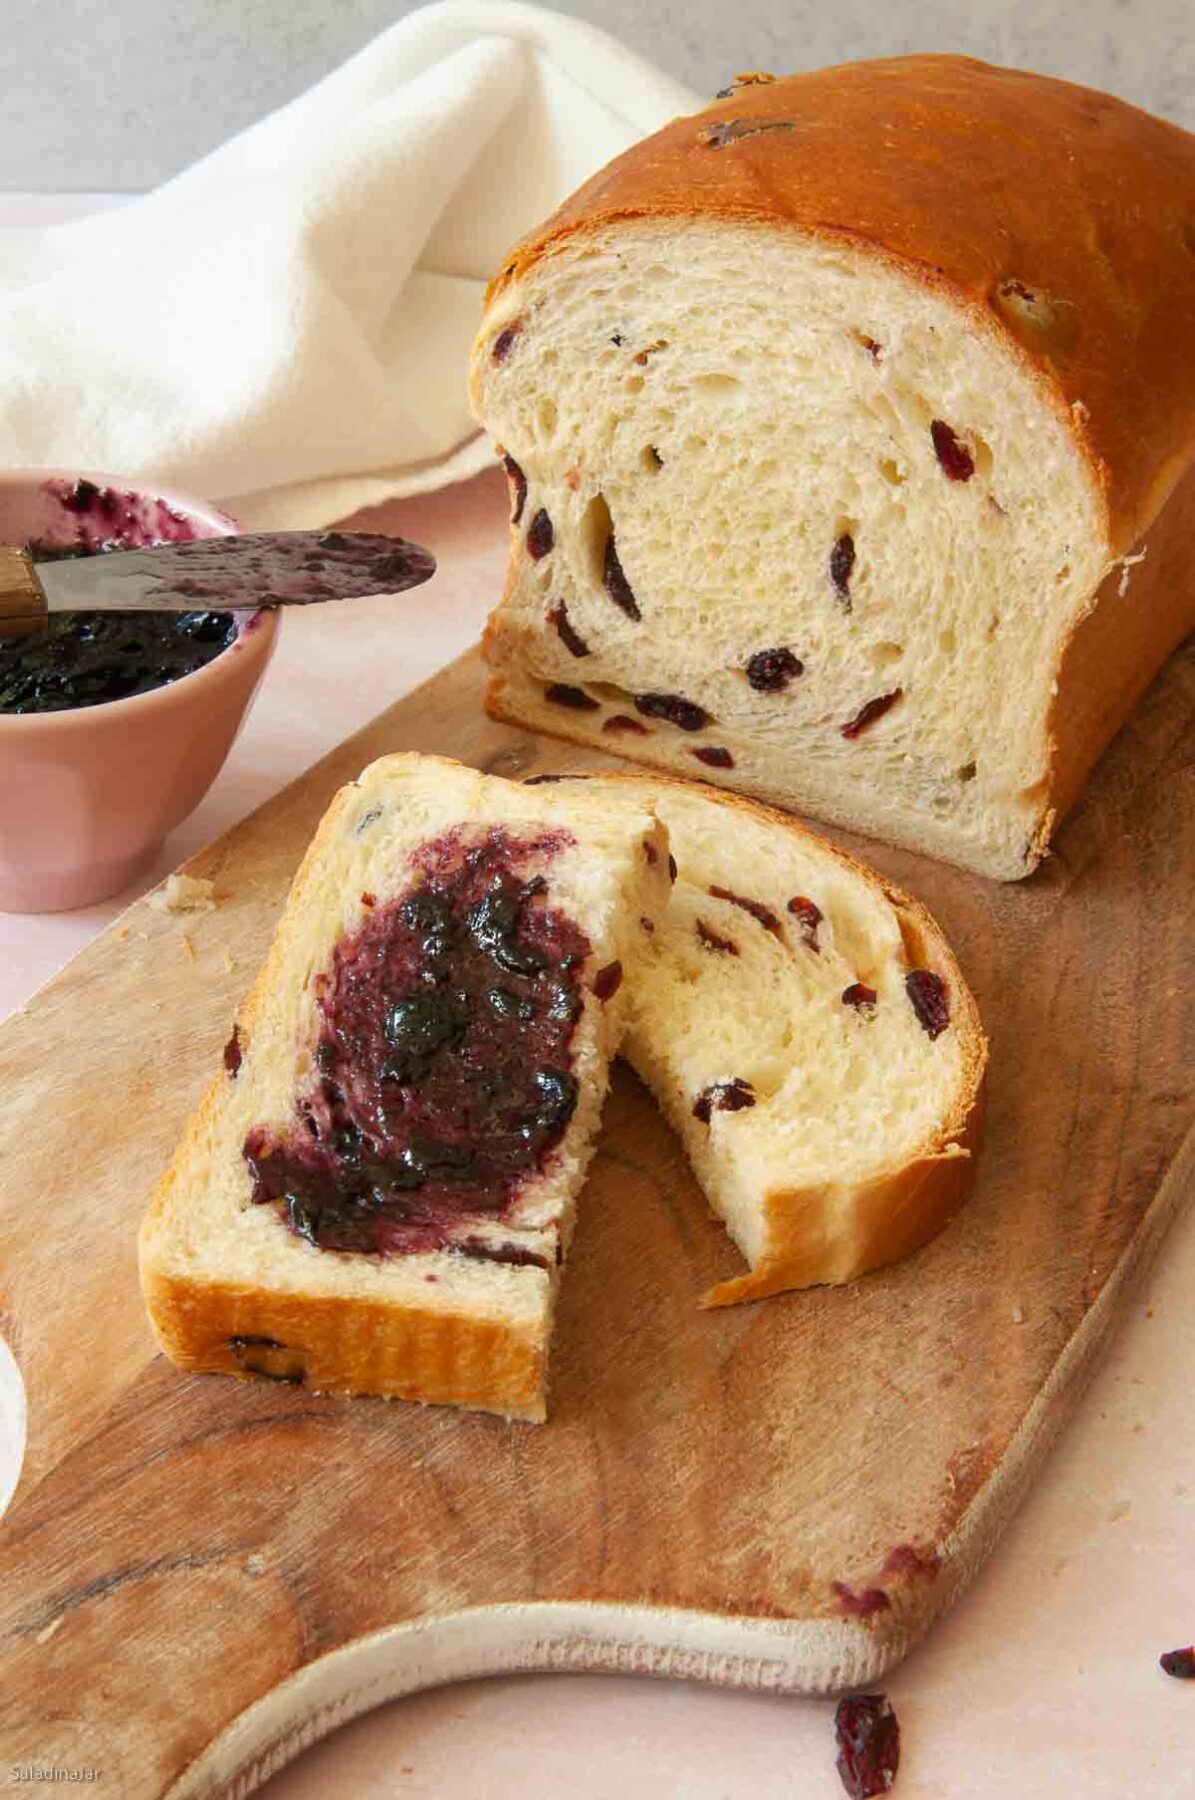 Sliced egg bread with dried fruit, one piece slathered with blackberry jelly.